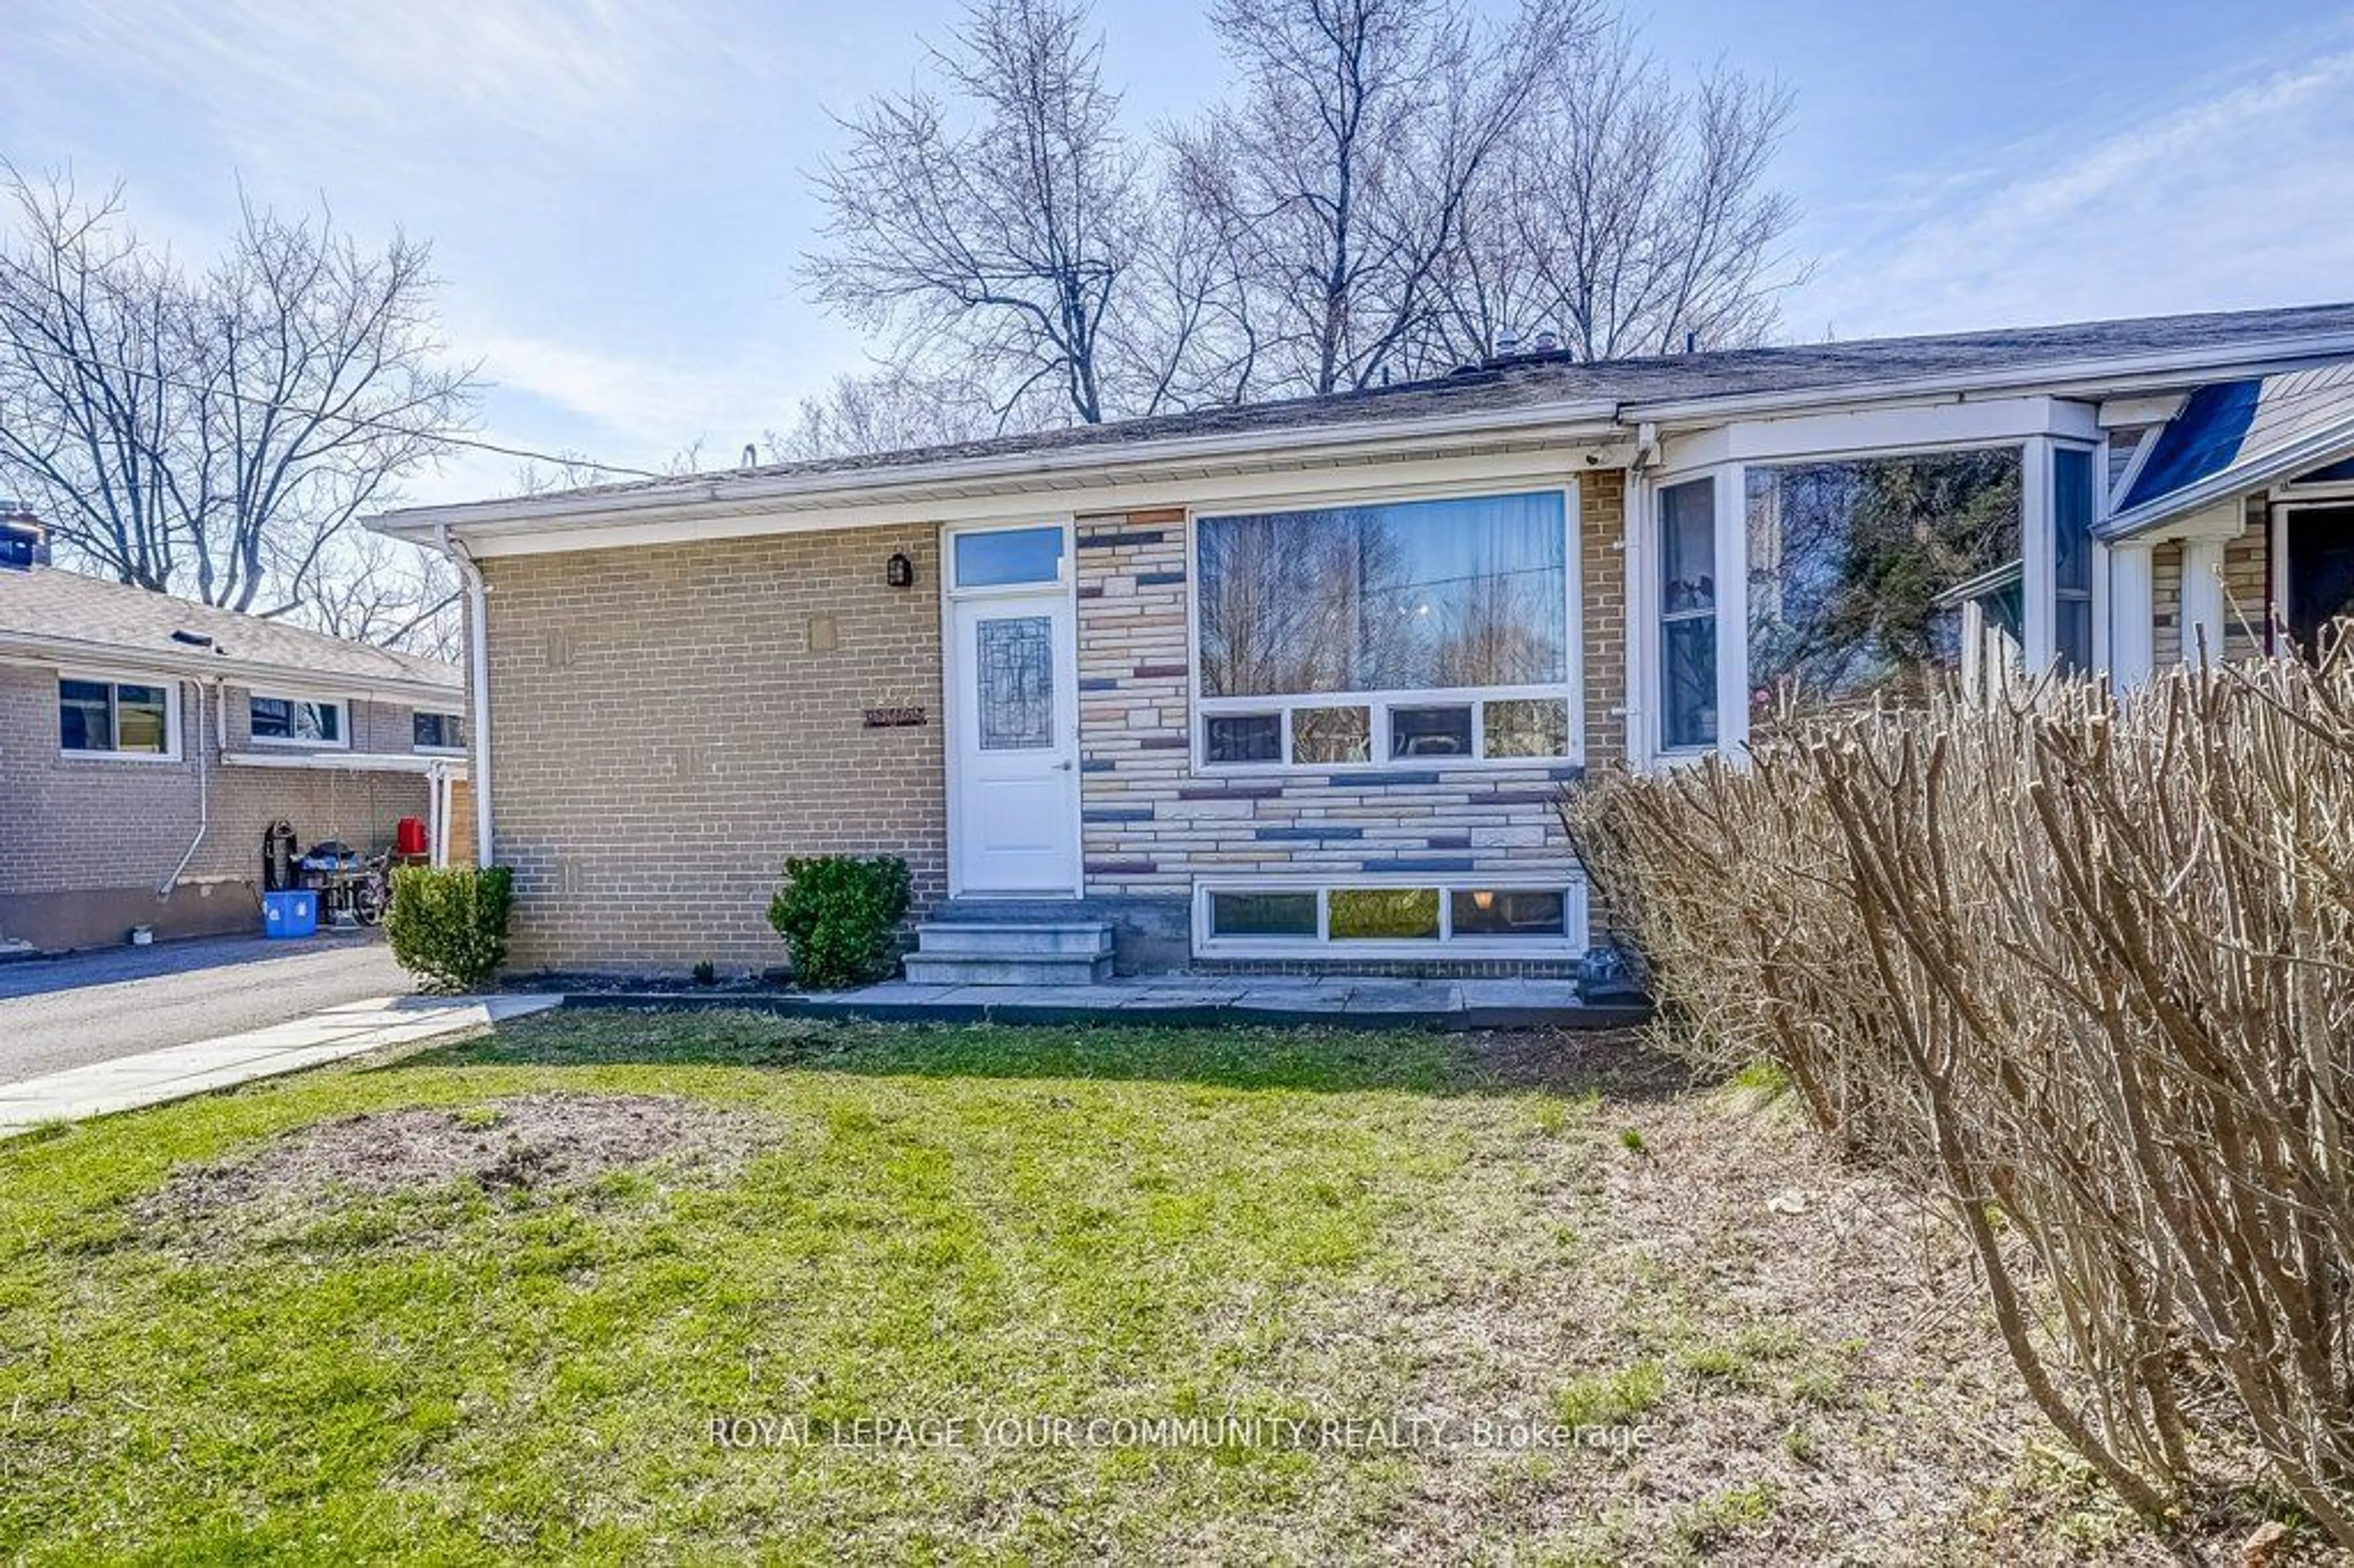 Frontside or backside of a home for 307 Axminster Dr, Richmond Hill Ontario L4C 2W3